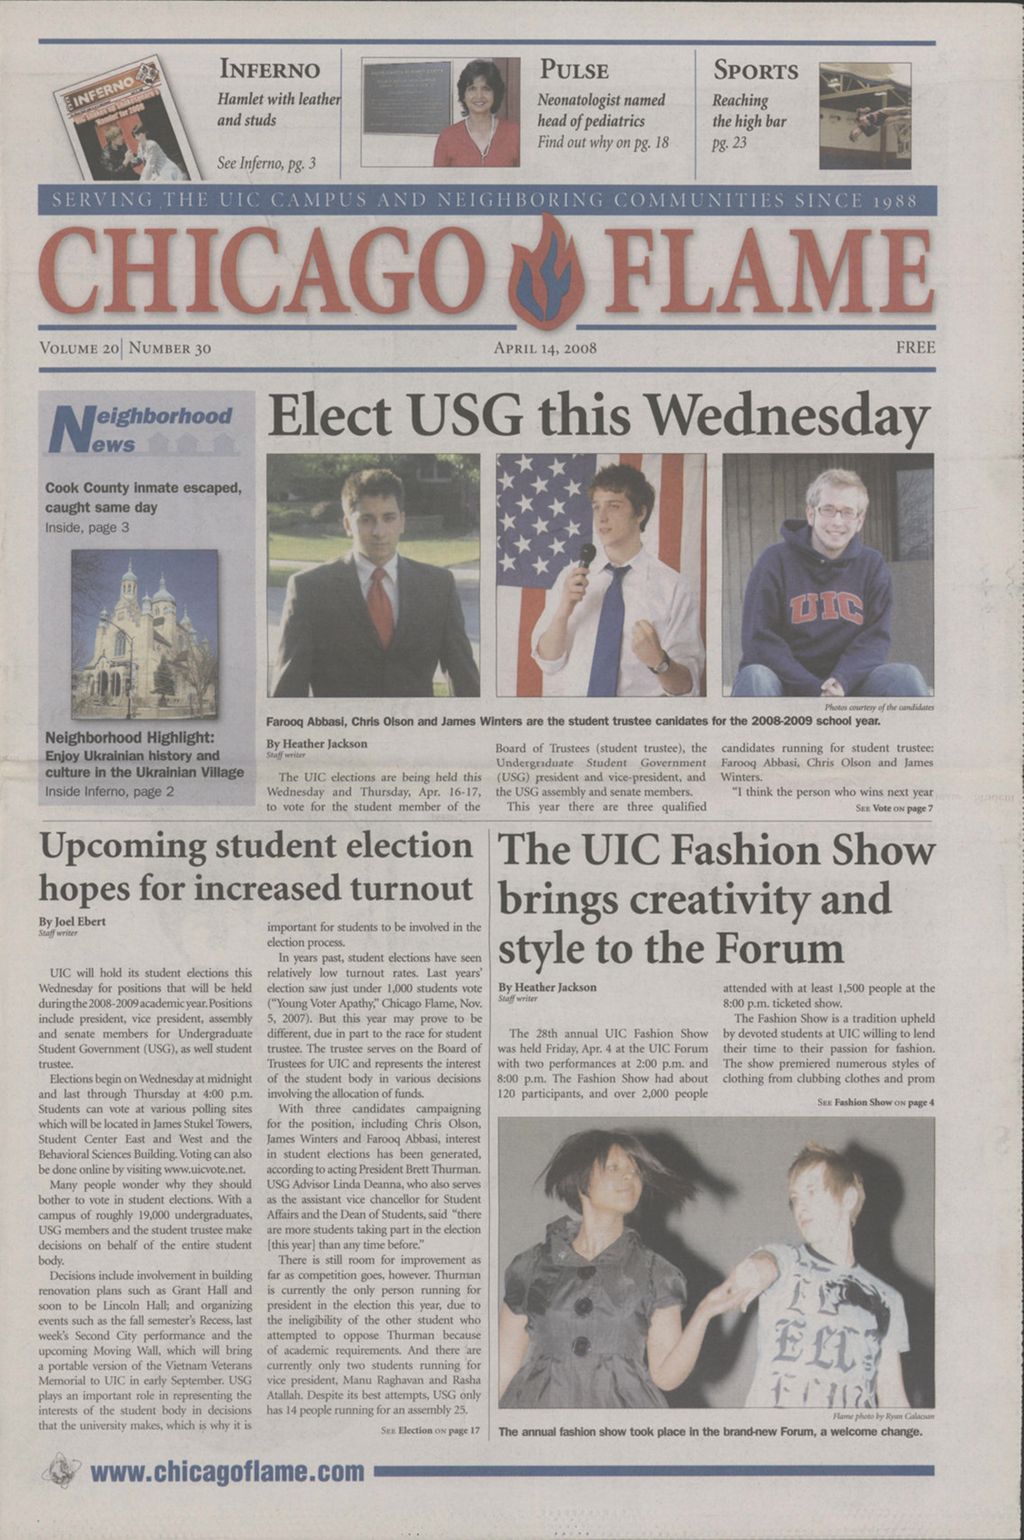 Miniature of Chicago Flame (April 14, 2008)